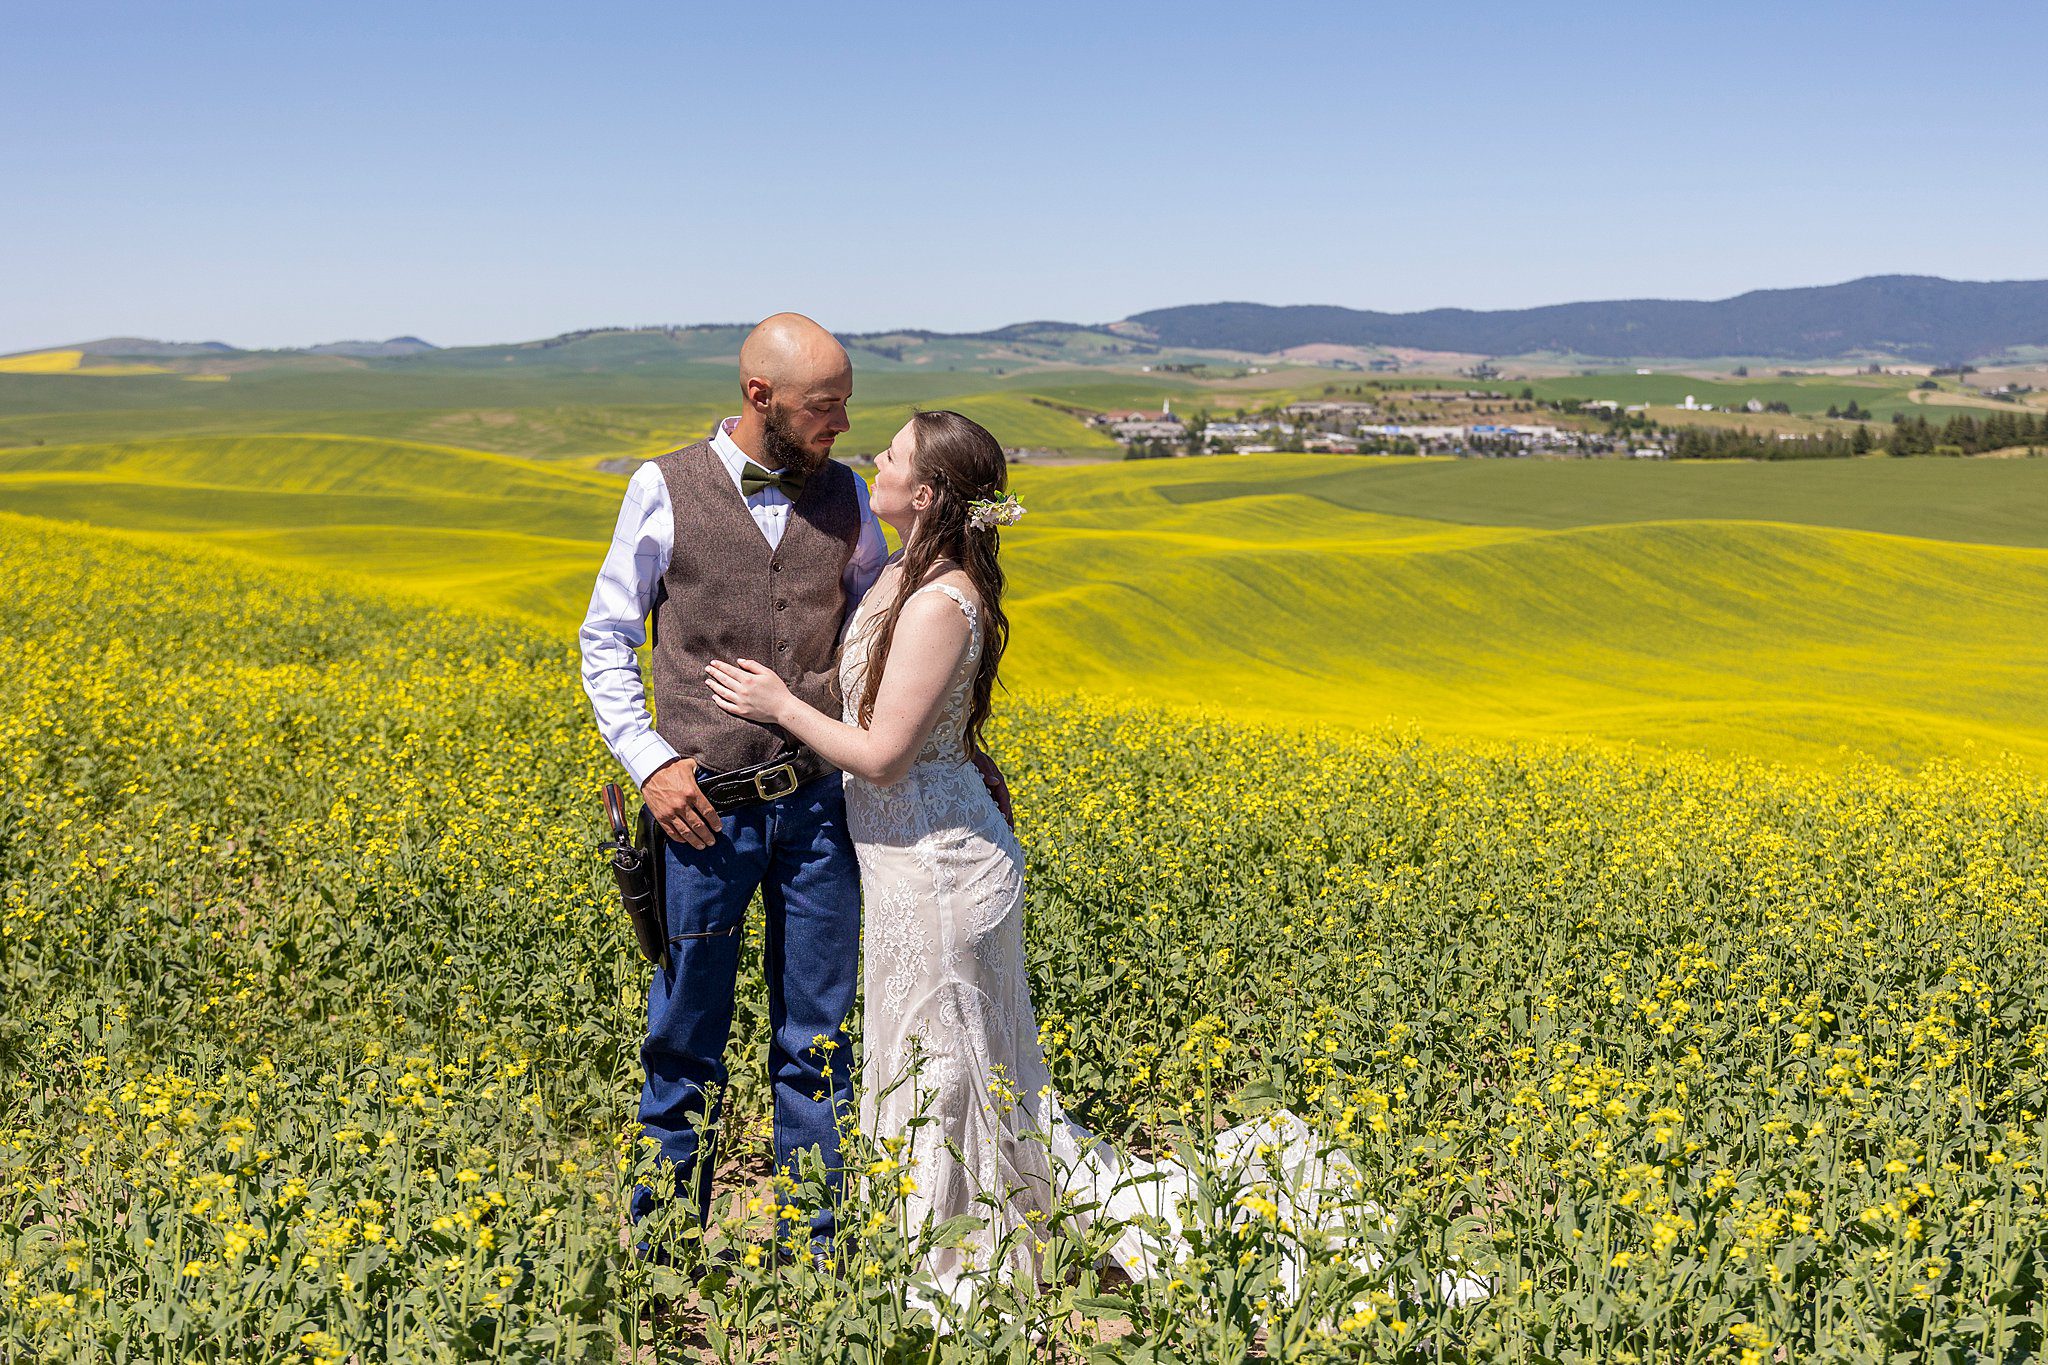 Newlyweds embrace on a hill surrounded by open rolling fields of yellow wildflowers silverbell wedding